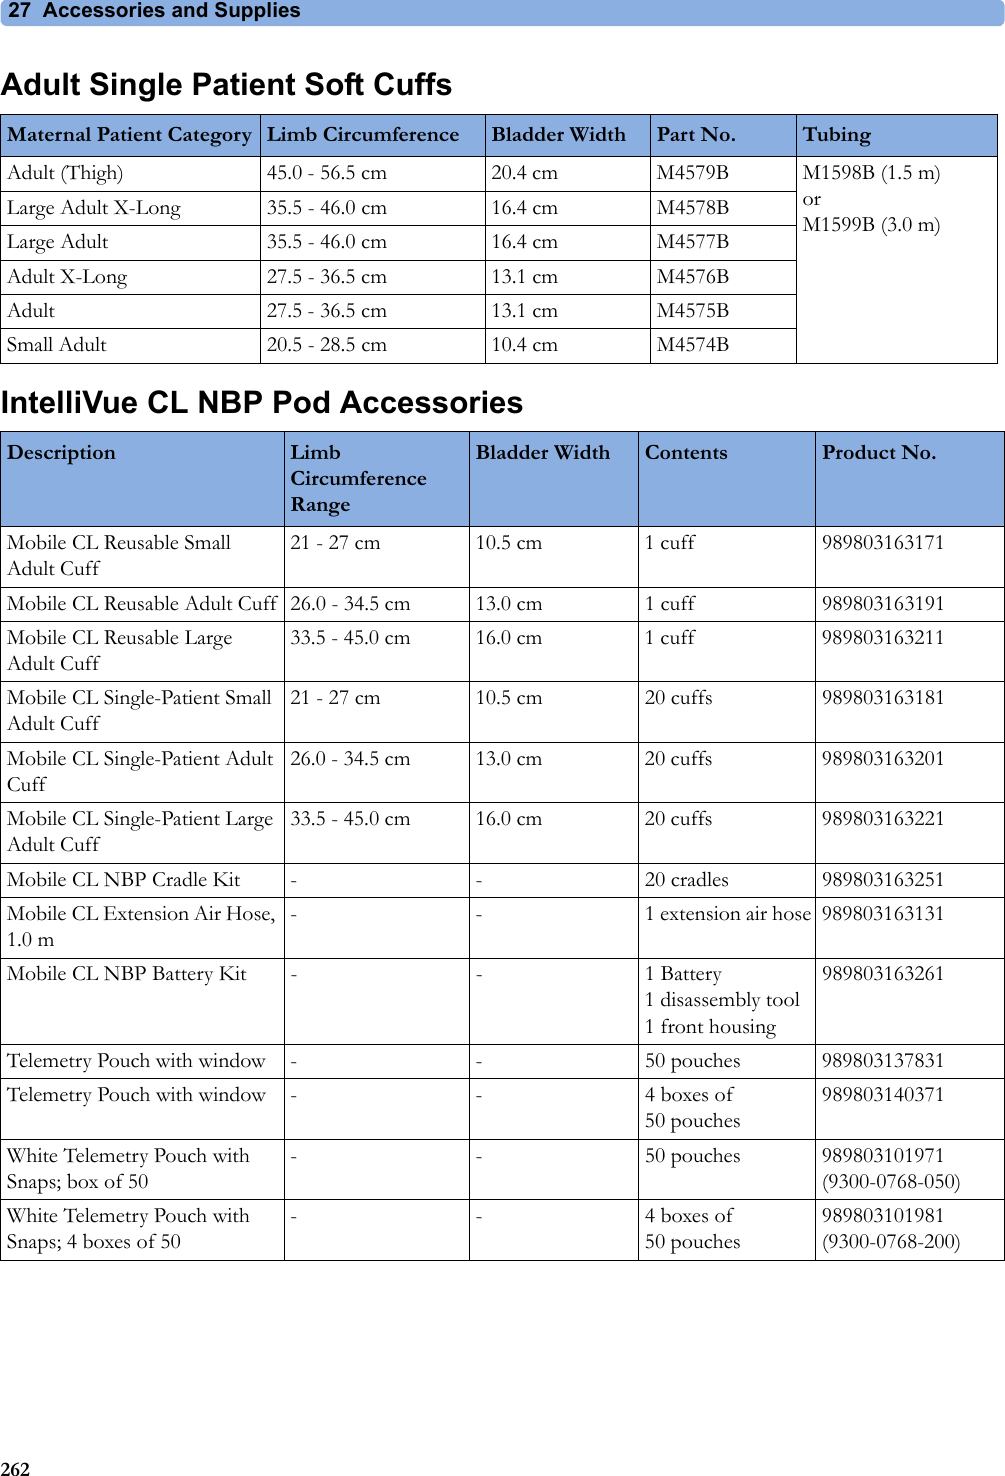 27 Accessories and Supplies262Adult Single Patient Soft CuffsIntelliVue CL NBP Pod AccessoriesMaternal Patient Category Limb Circumference Bladder Width Part No. TubingAdult (Thigh) 45.0 - 56.5 cm 20.4 cm M4579B M1598B (1.5 m)orM1599B (3.0 m)Large Adult X-Long 35.5 - 46.0 cm 16.4 cm M4578BLarge Adult 35.5 - 46.0 cm 16.4 cm M4577BAdult X-Long 27.5 - 36.5 cm 13.1 cm M4576BAdult 27.5 - 36.5 cm 13.1 cm M4575BSmall Adult 20.5 - 28.5 cm 10.4 cm M4574BDescription Limb Circumference RangeBladder Width Contents Product No.Mobile CL Reusable Small Adult Cuff21 - 27 cm 10.5 cm 1 cuff 989803163171Mobile CL Reusable Adult Cuff 26.0 - 34.5 cm 13.0 cm 1 cuff 989803163191Mobile CL Reusable Large Adult Cuff33.5 - 45.0 cm 16.0 cm 1 cuff 989803163211Mobile CL Single-Patient Small Adult Cuff21 - 27 cm 10.5 cm 20 cuffs 989803163181Mobile CL Single-Patient Adult Cuff26.0 - 34.5 cm 13.0 cm 20 cuffs 989803163201Mobile CL Single-Patient Large Adult Cuff33.5 - 45.0 cm 16.0 cm 20 cuffs 989803163221Mobile CL NBP Cradle Kit - - 20 cradles 989803163251Mobile CL Extension Air Hose, 1.0 m- - 1 extension air hose 989803163131Mobile CL NBP Battery Kit - -  1 Battery1 disassembly tool1 front housing989803163261Telemetry Pouch with window - - 50 pouches 989803137831Telemetry Pouch with window - - 4 boxes of 50 pouches989803140371White Telemetry Pouch with Snaps; box of 50- - 50 pouches 989803101971(9300-0768-050)White Telemetry Pouch with Snaps; 4 boxes of 50--4boxes of 50 pouches989803101981(9300-0768-200)